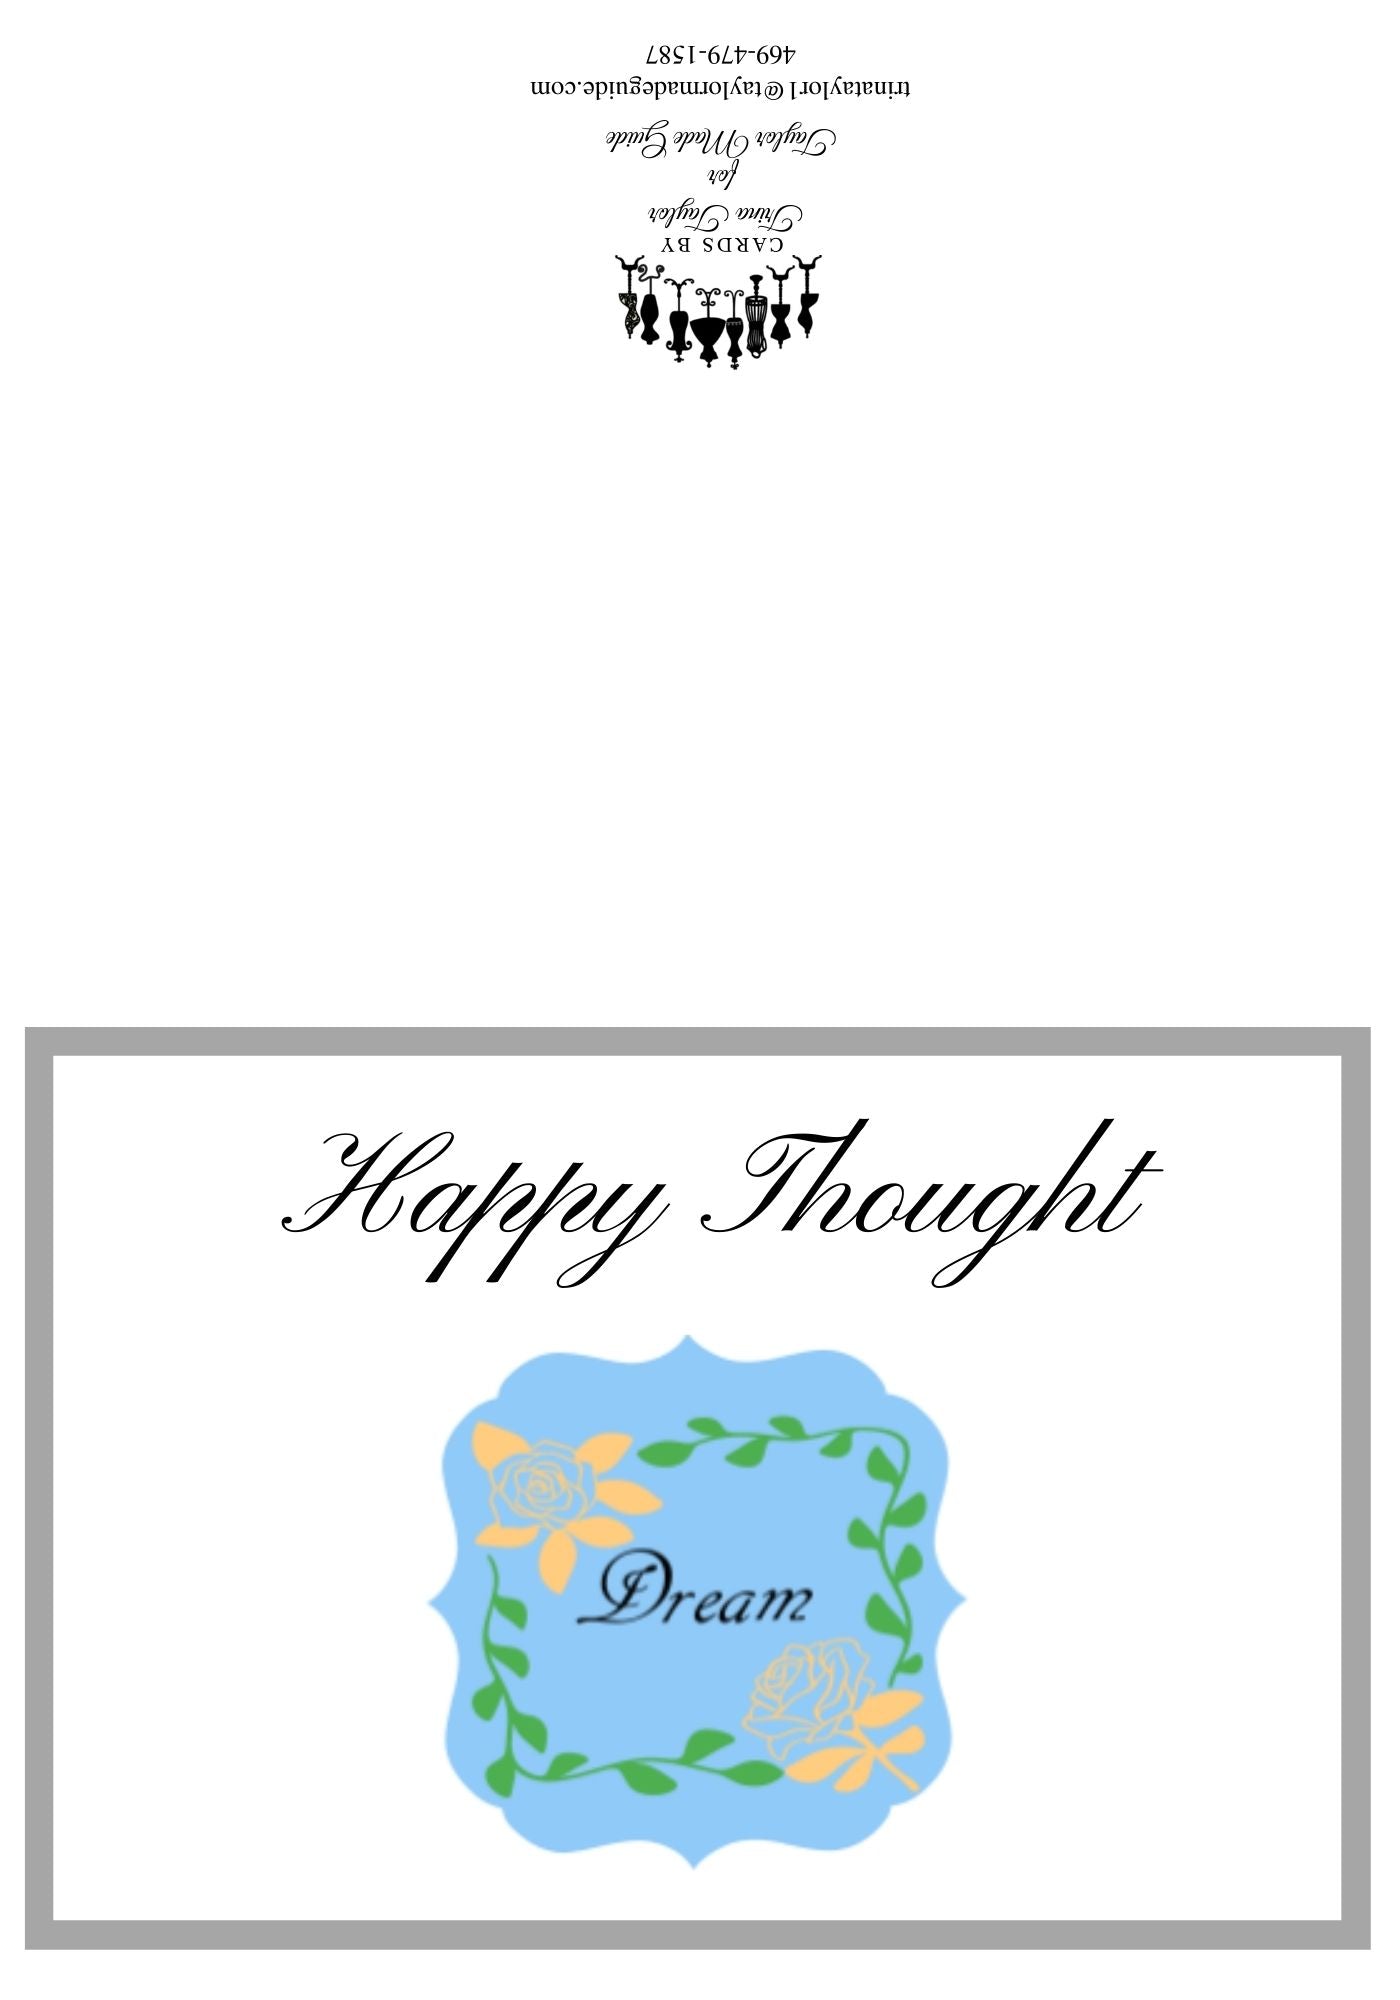 Happy Thought, Dream